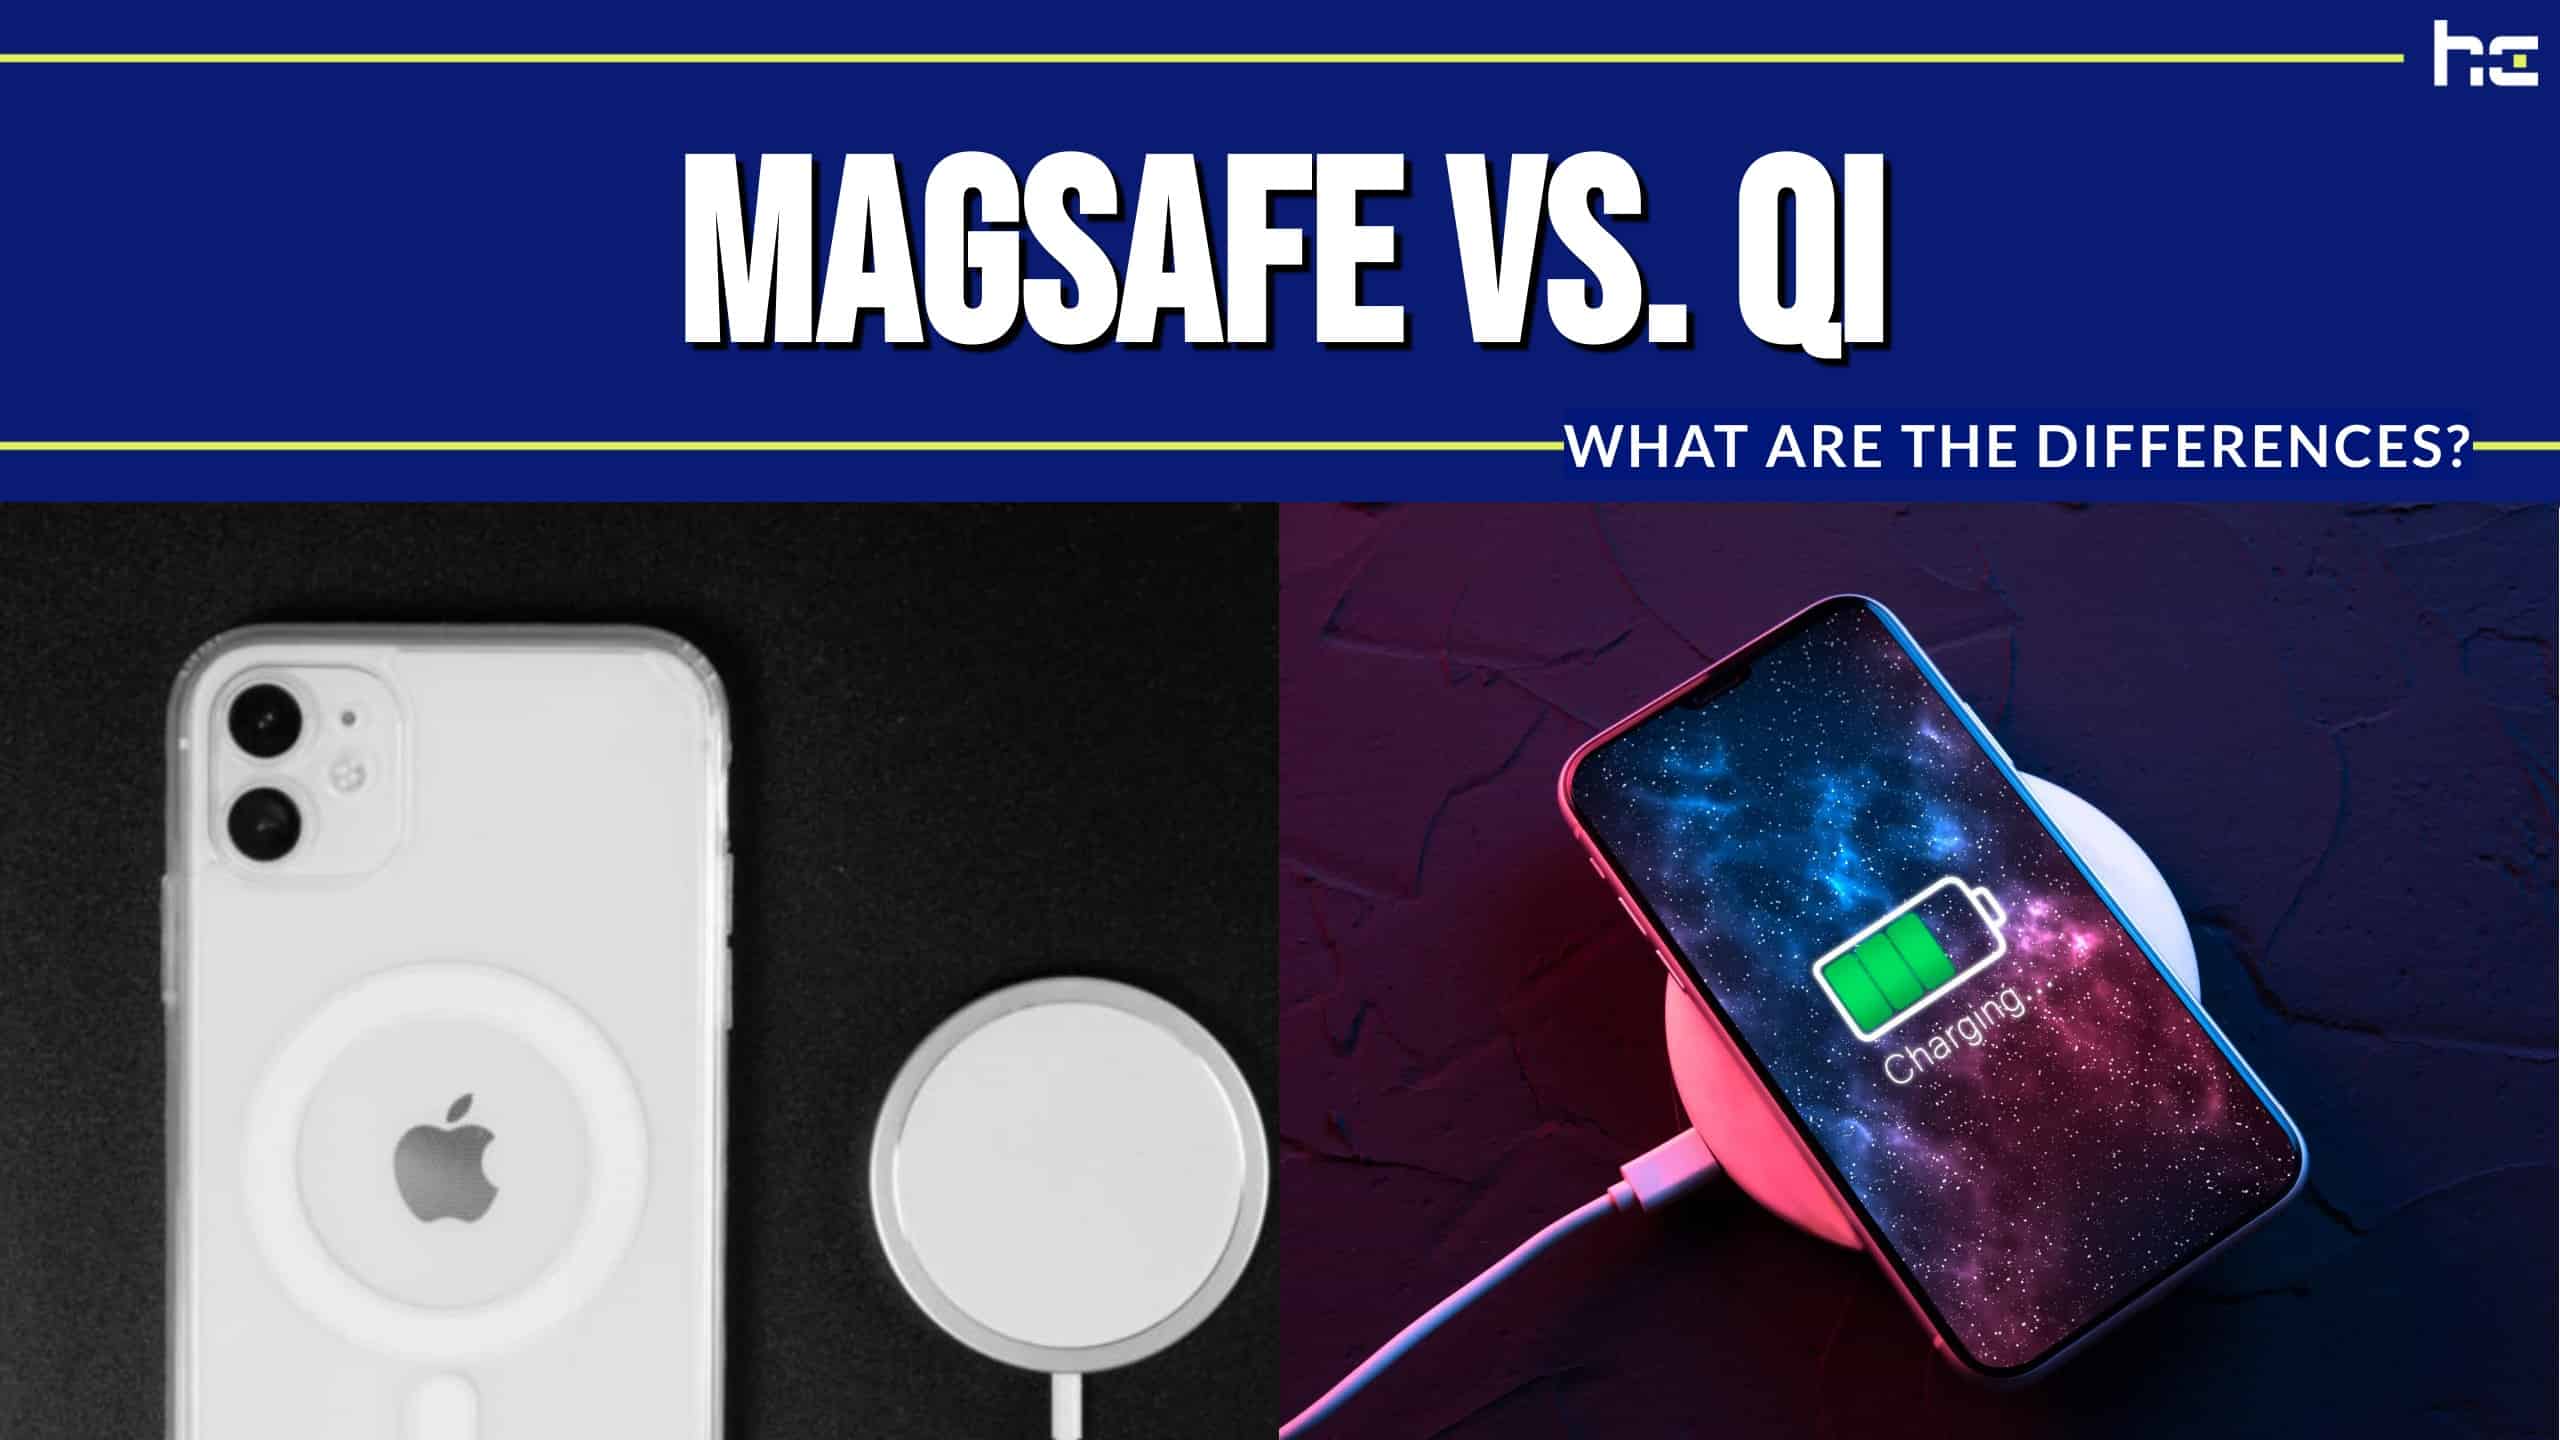 MagSafe and Qi chargers shown side by side.